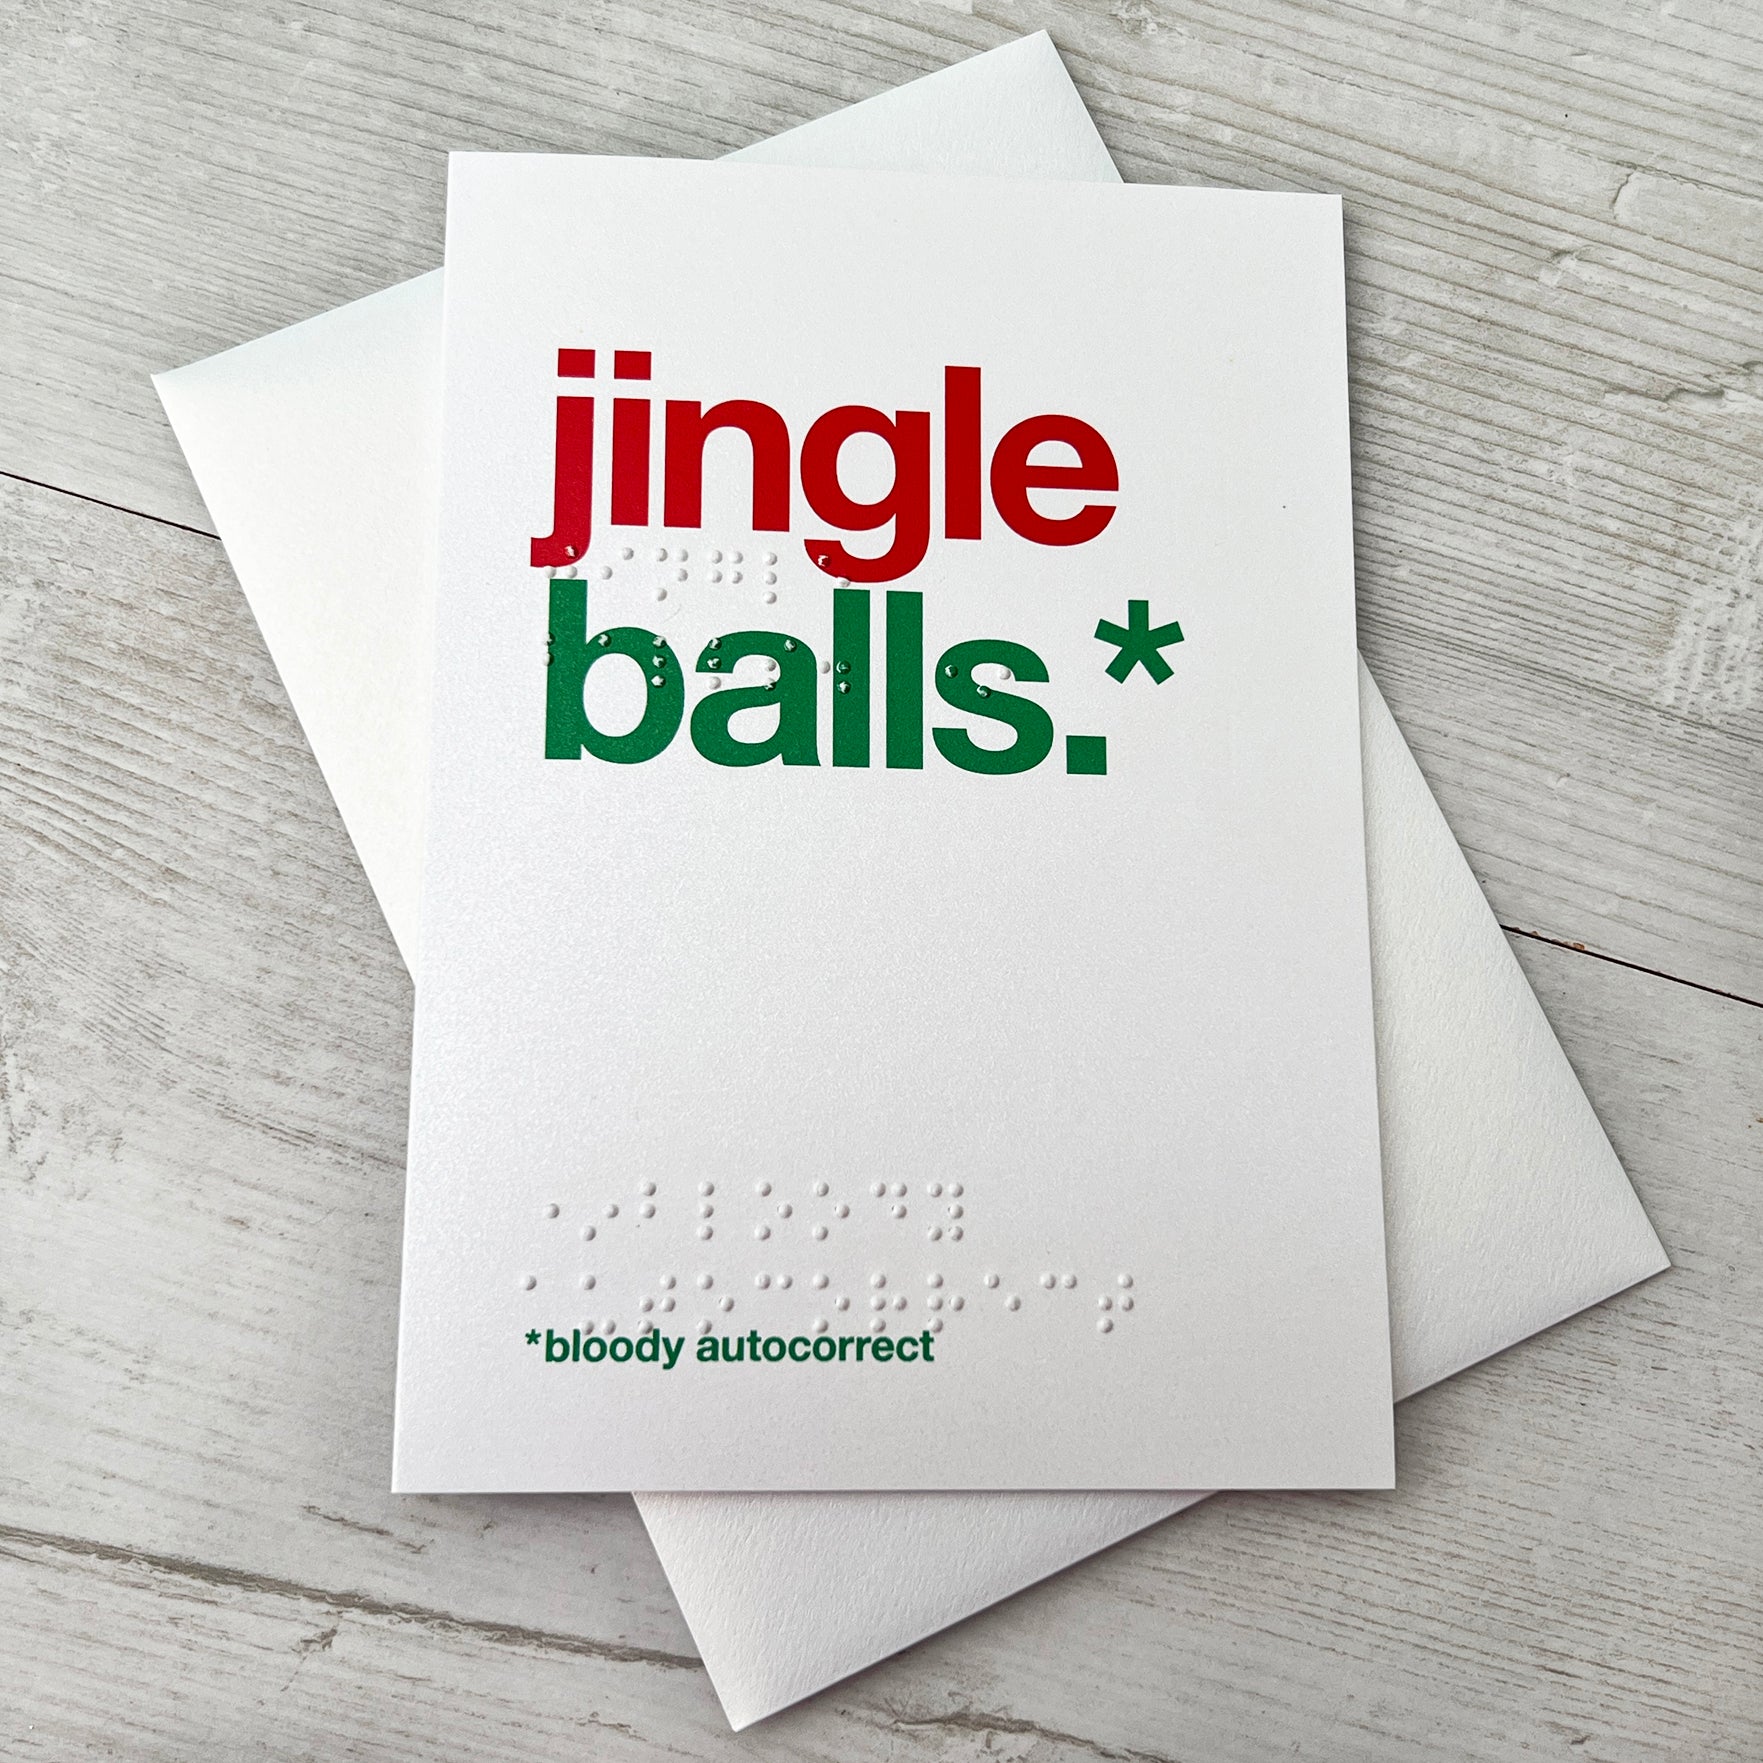 A white card with colourful text saying jingle balls.* *bloody autocorrect with braille saying the same.